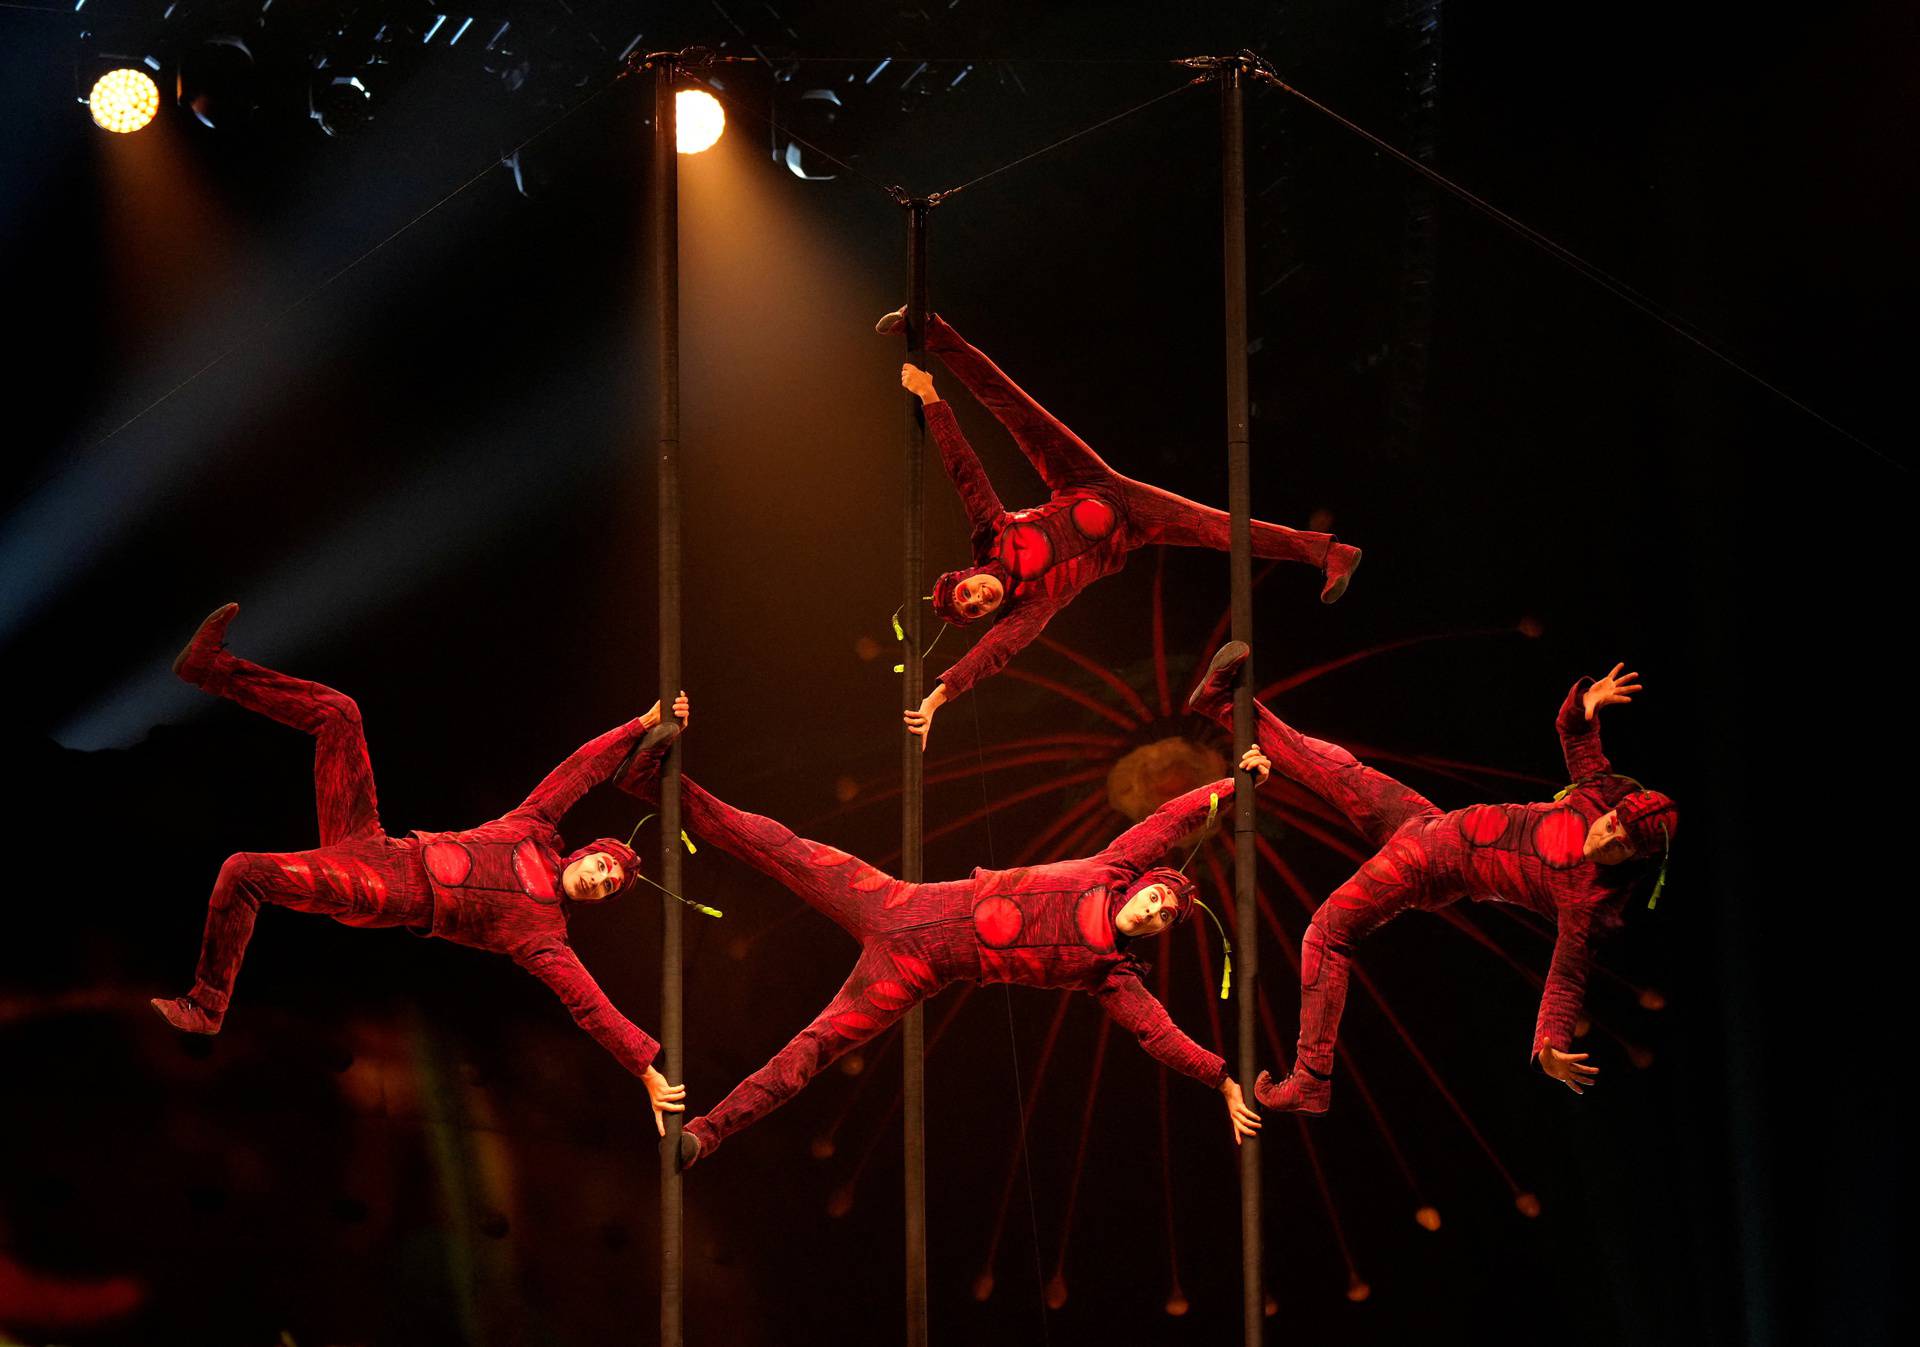 Cirque du Soleil with Ovo show performs in Riga